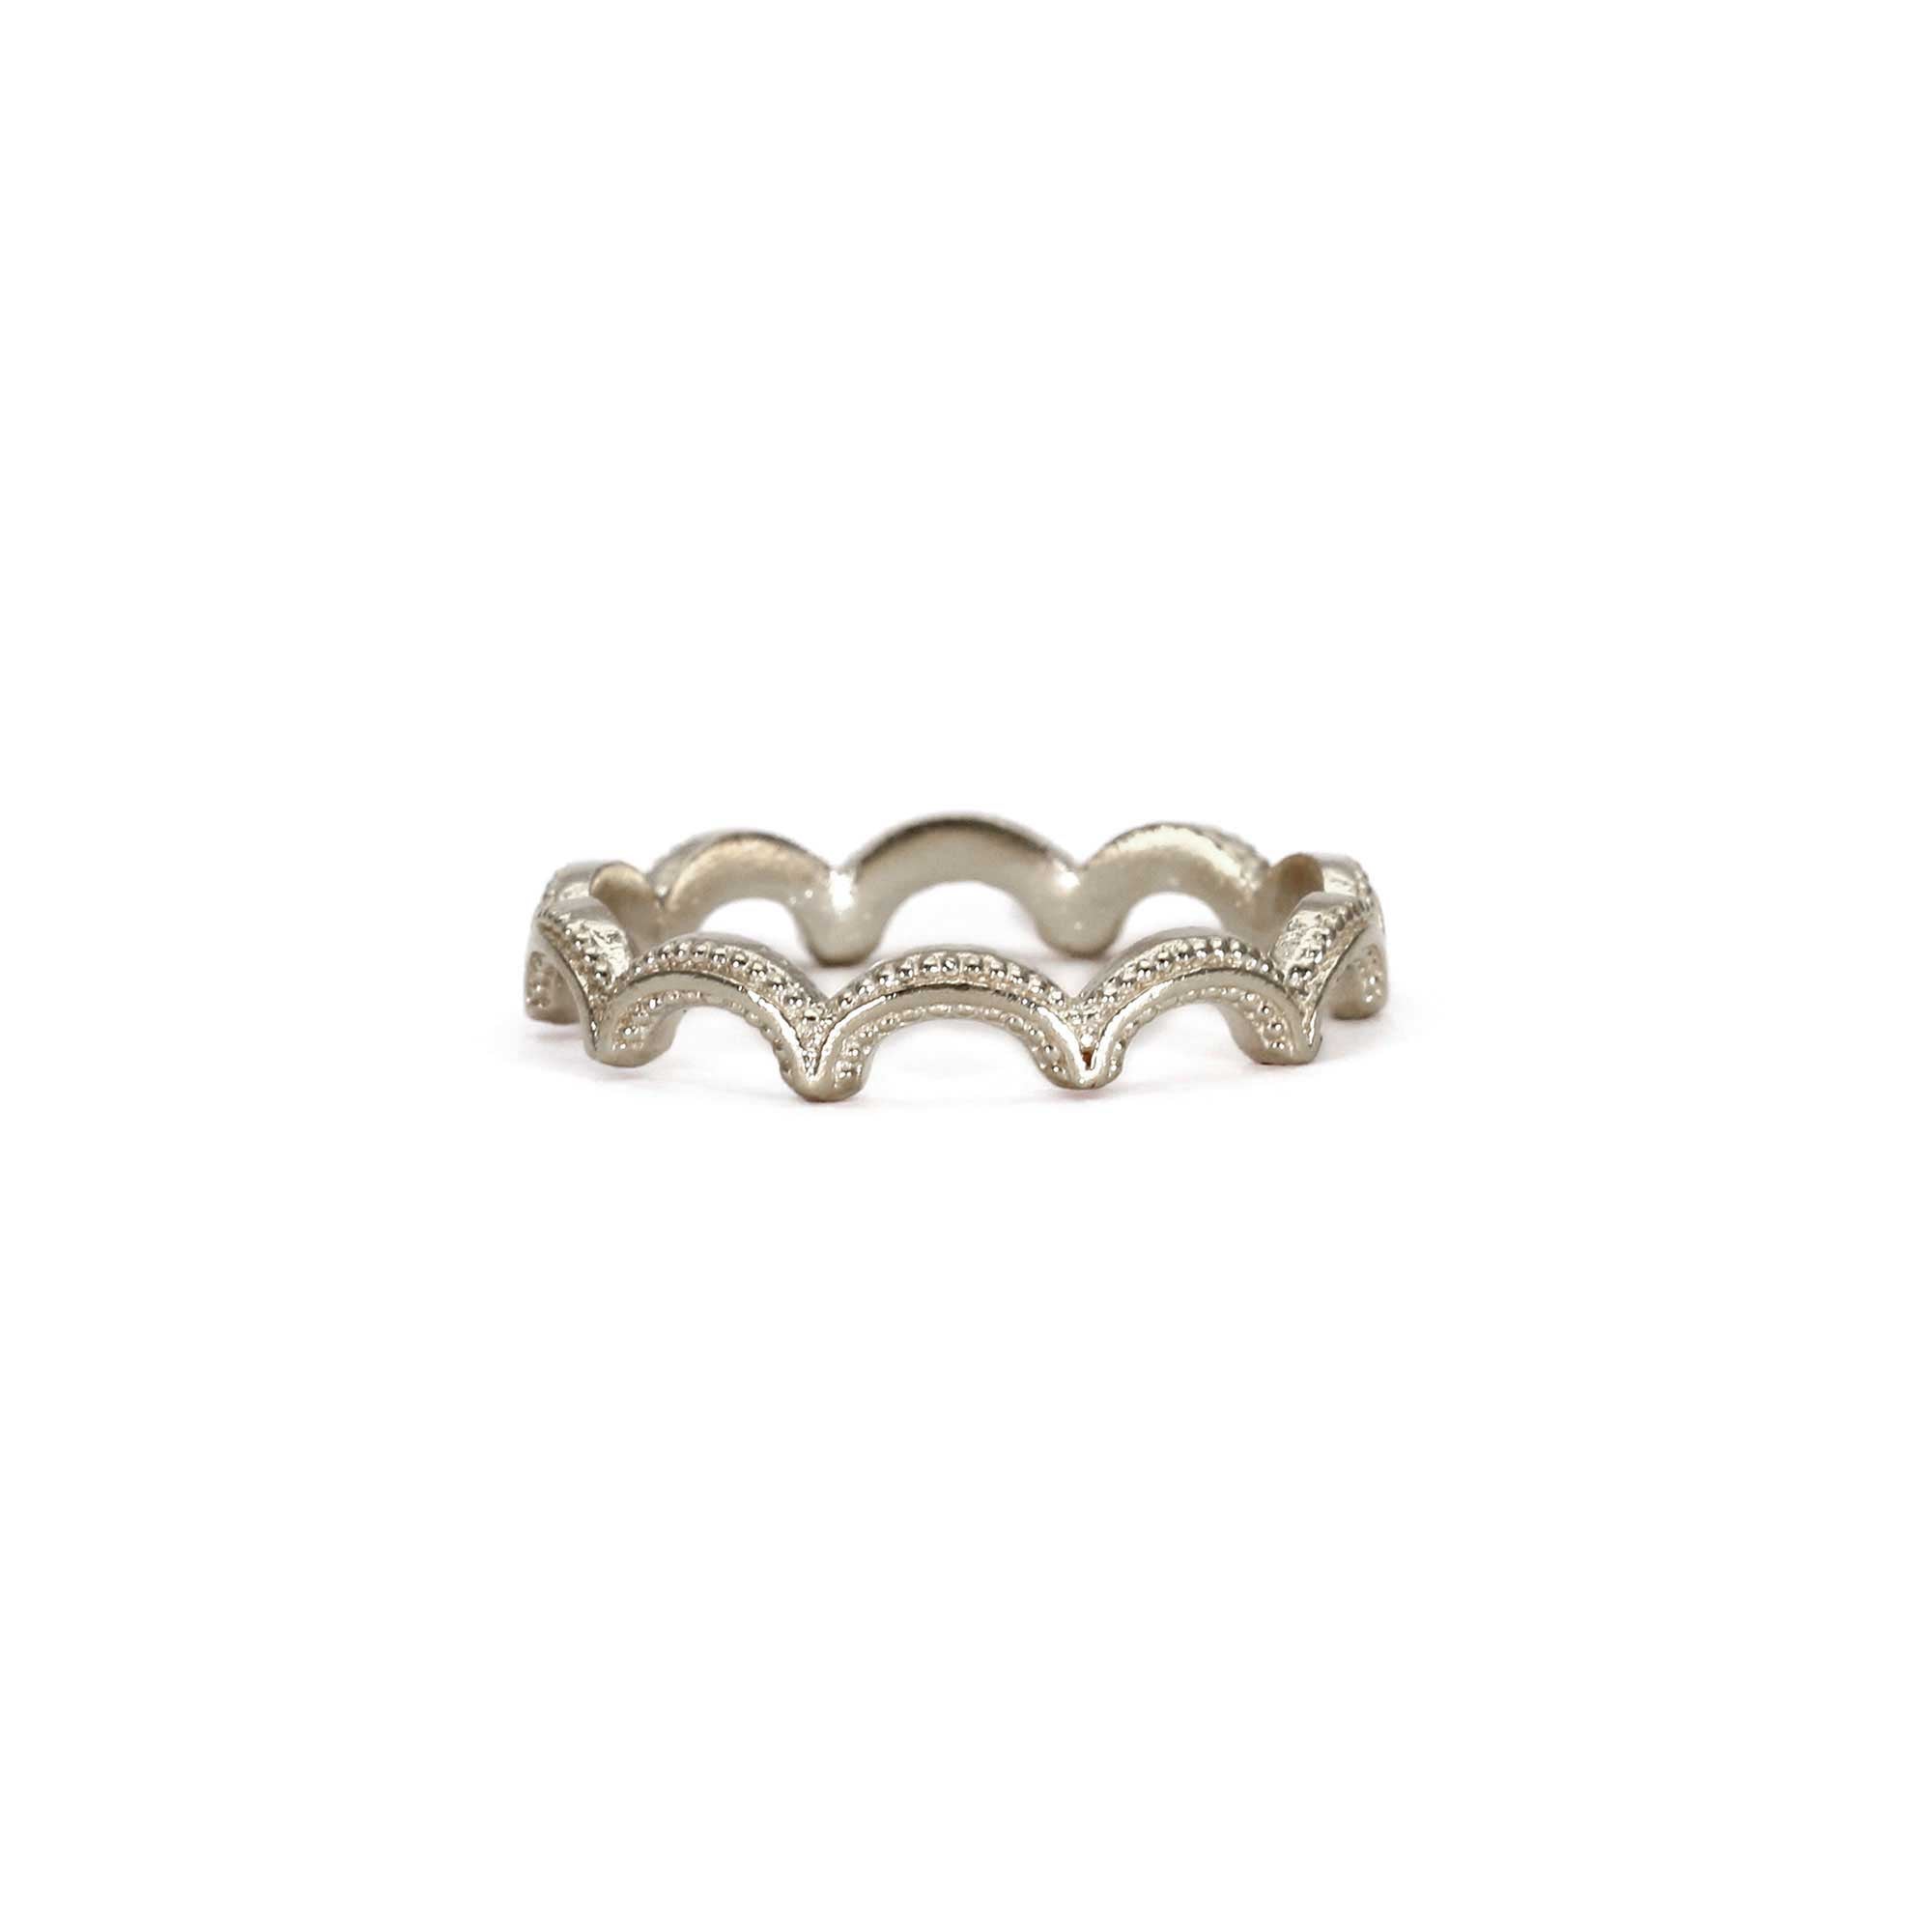 Magma Wiggle Wavy Ring in Sterling SIlver